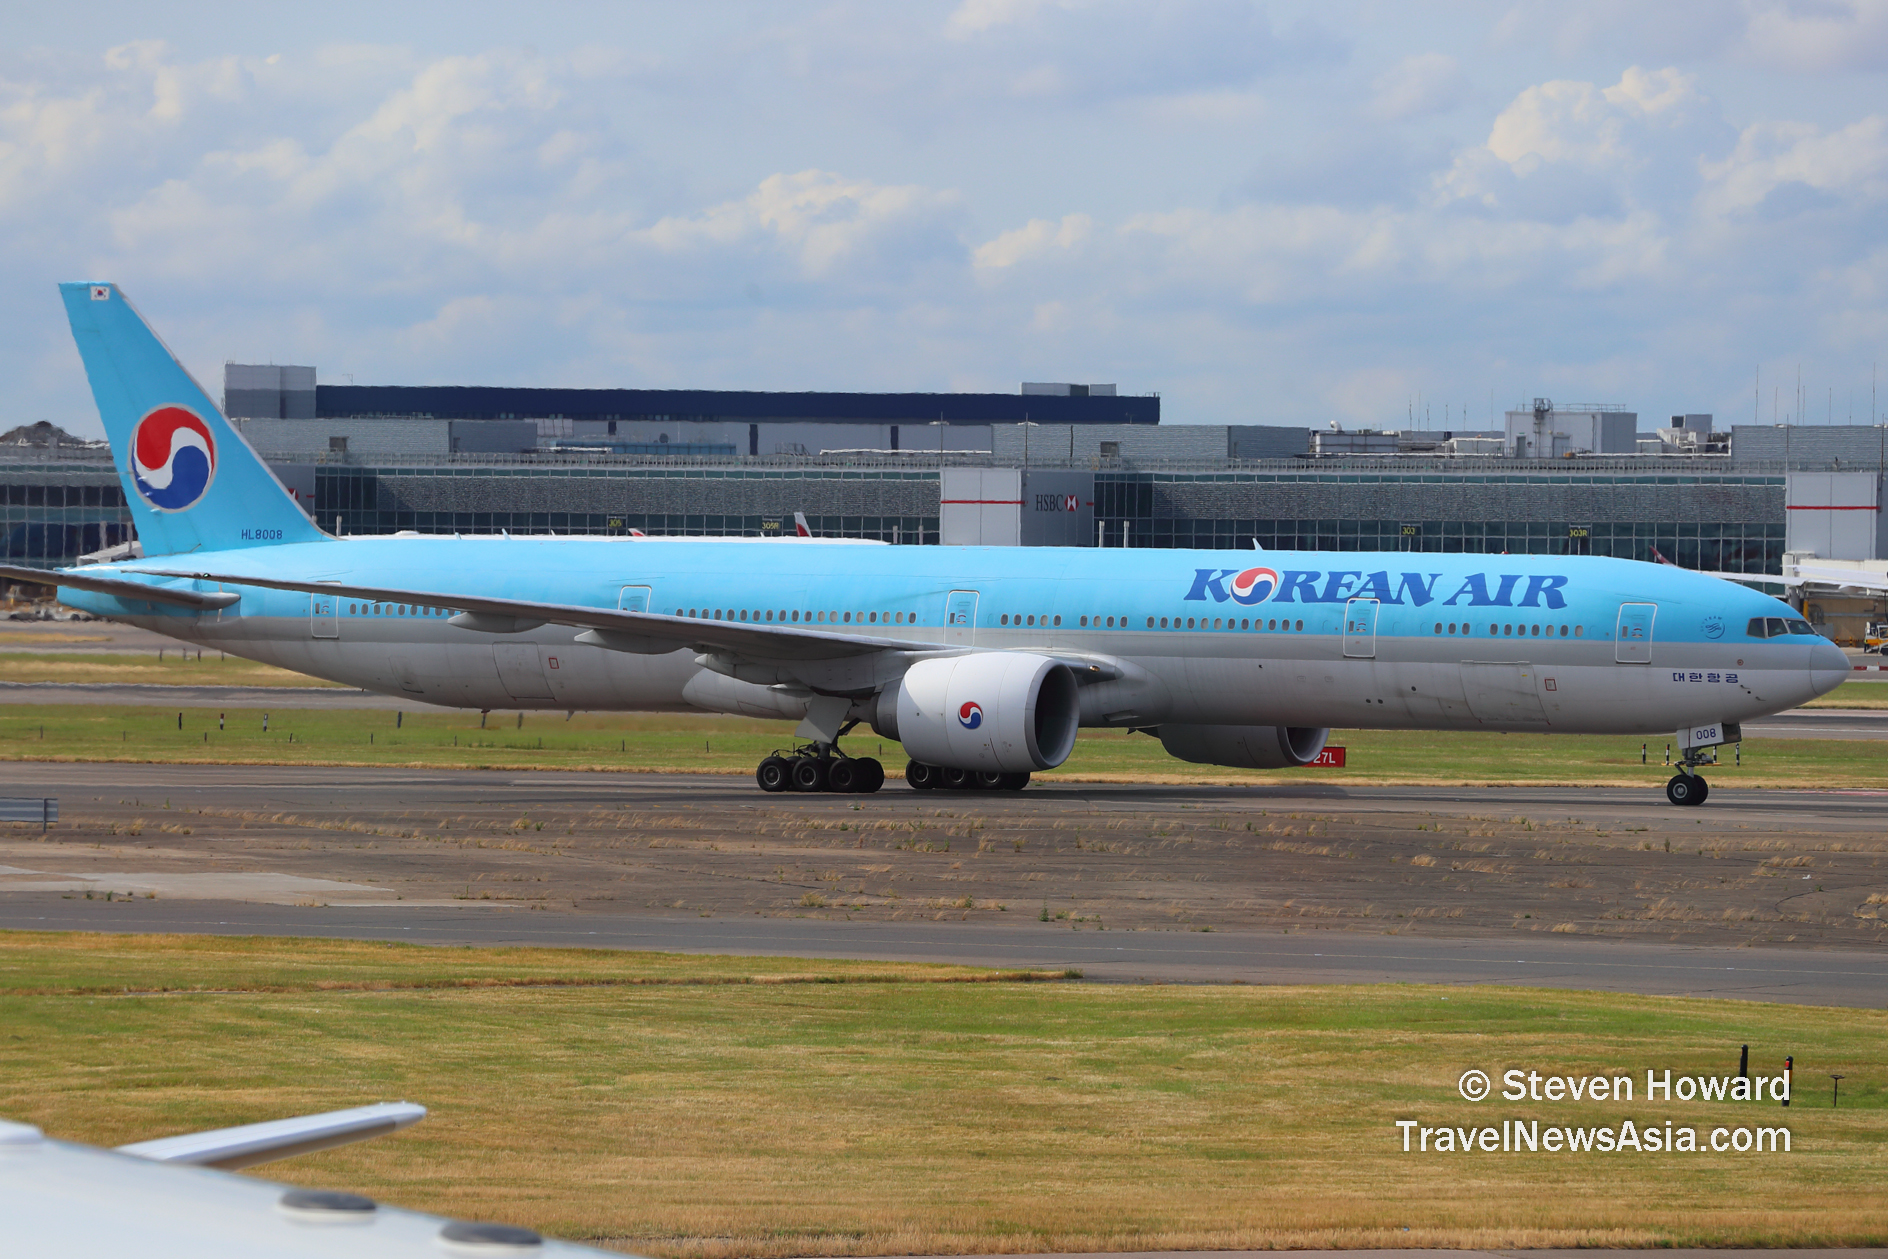 Korean Air Boeing 777 reg: HL8008. Picture by Steven Howard of TravelNewsAsia.com Click to enlarge.